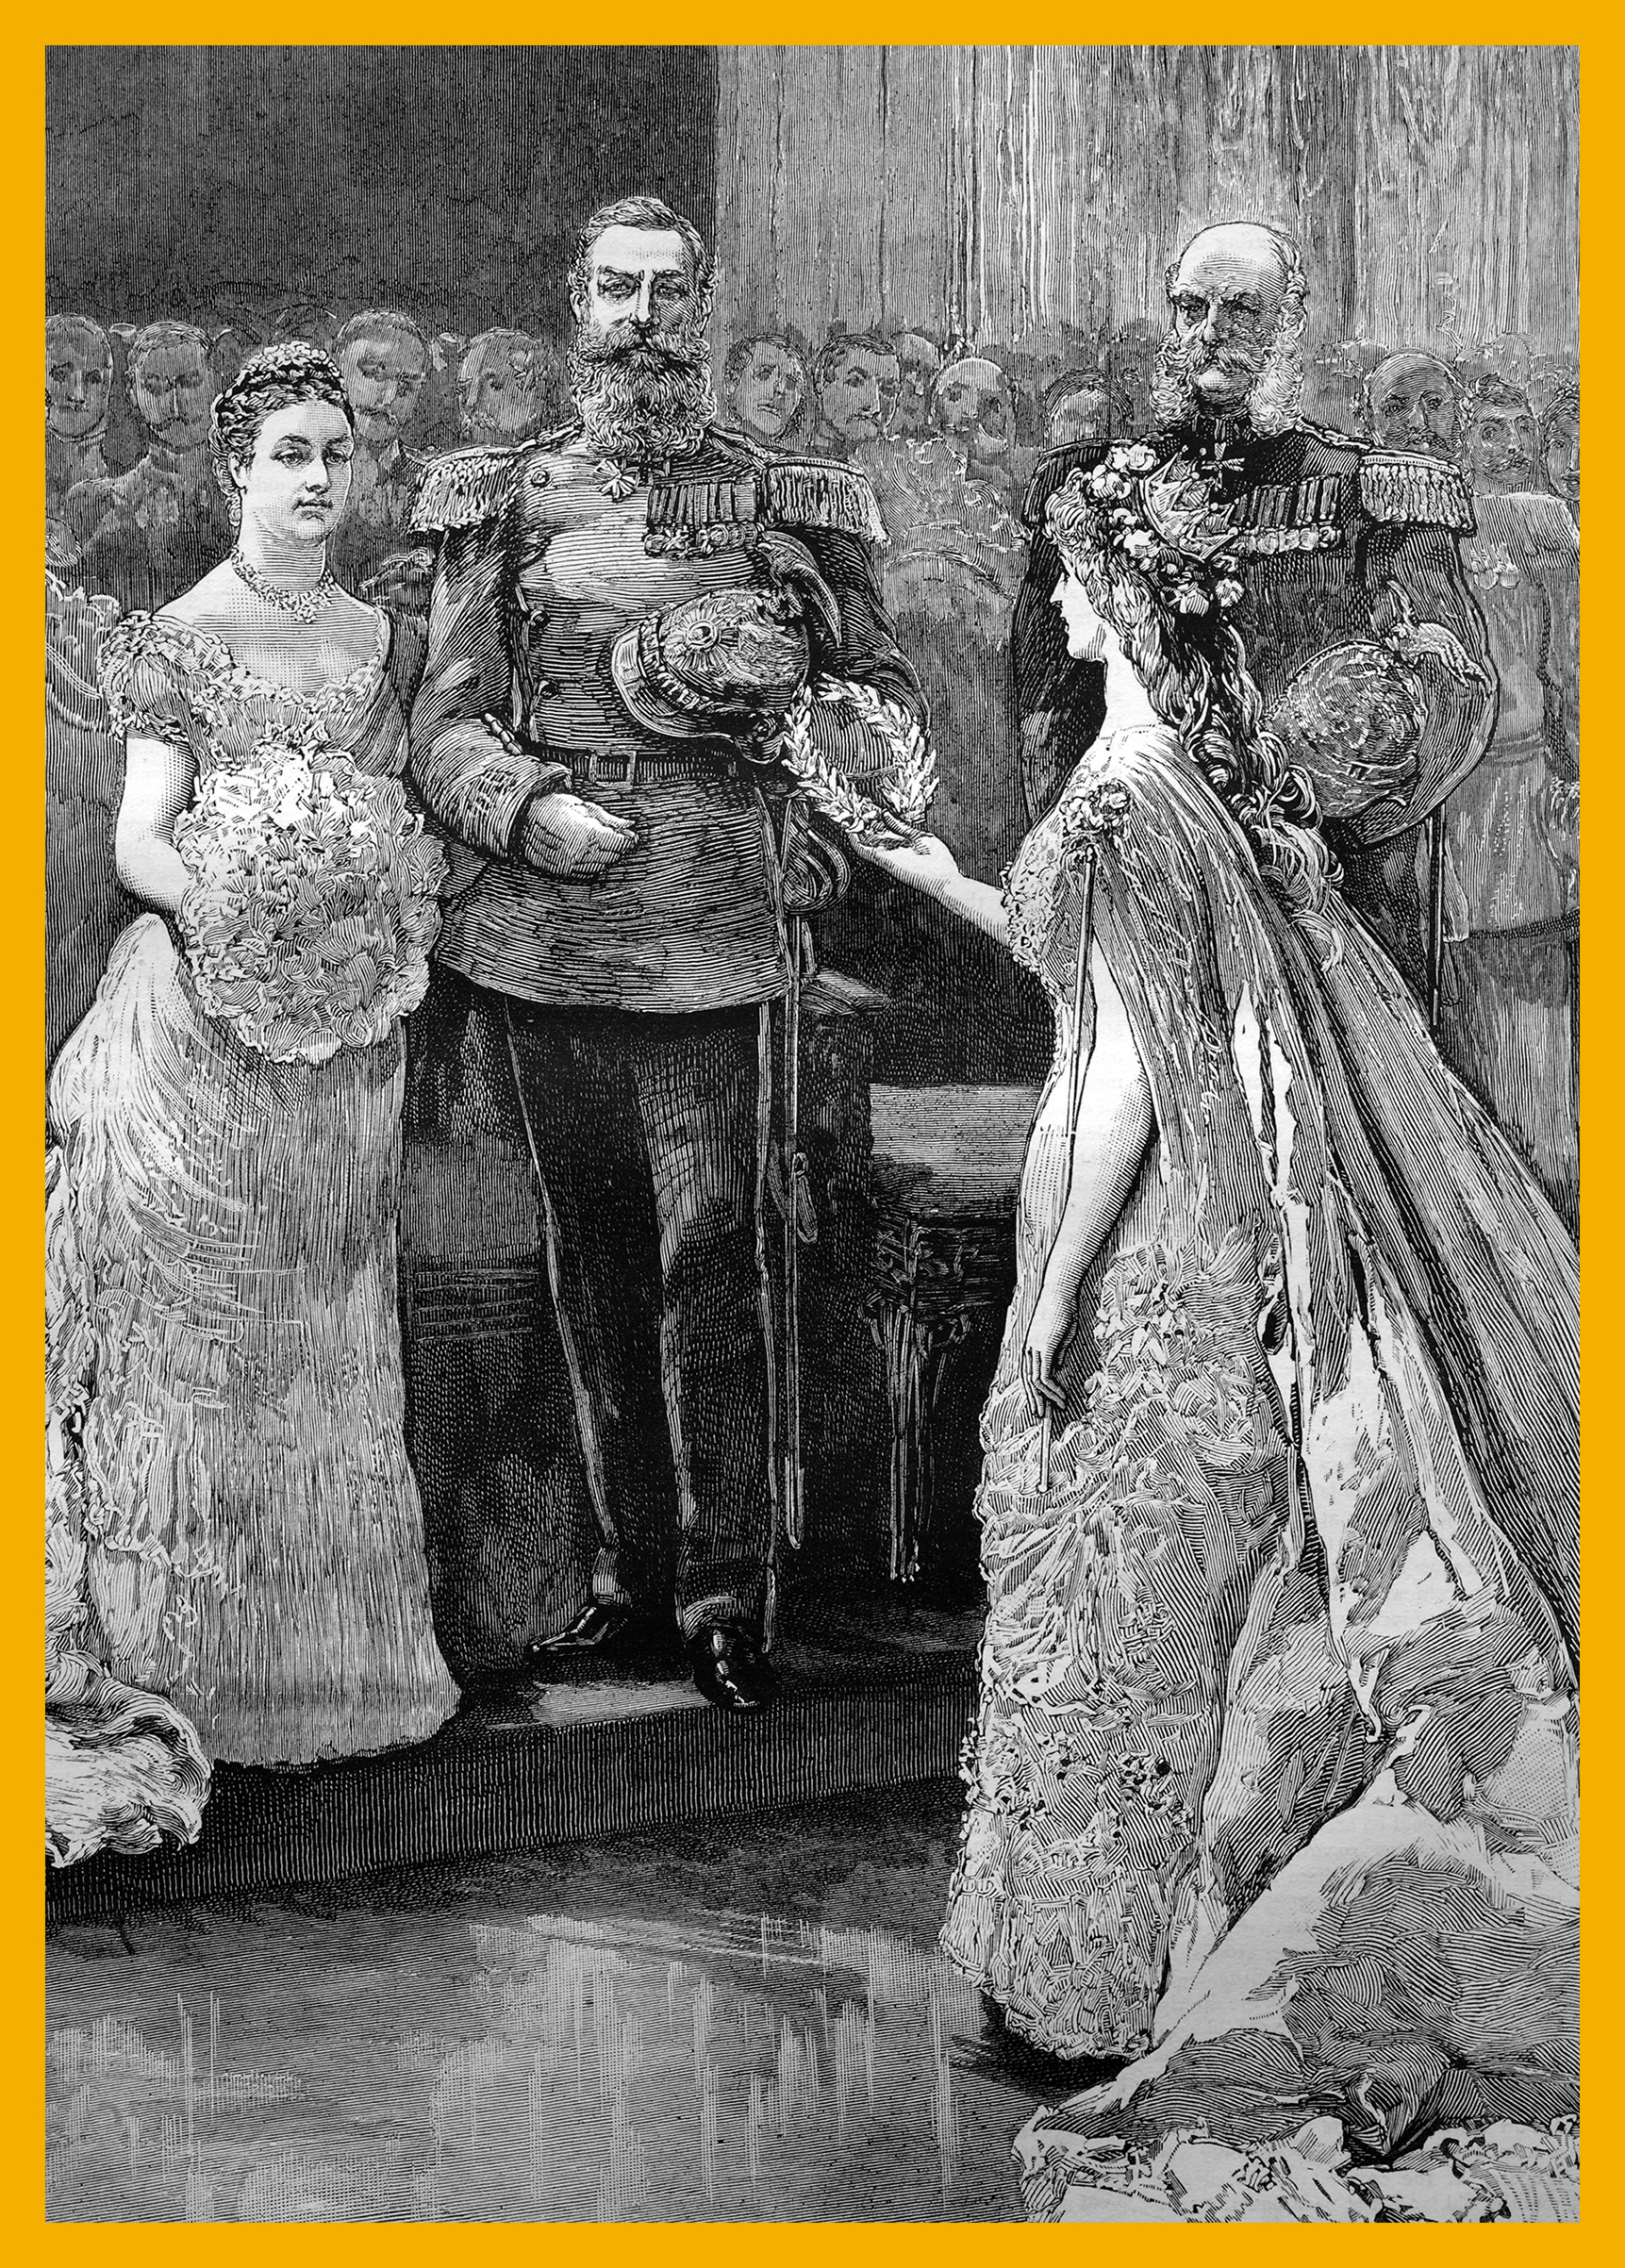 The silver wedding of the imperial prince and princess of Germany, the koenigin minne" or "queen of love" presenting a silver wreath to the imperial princess, historical illustration, 1884.